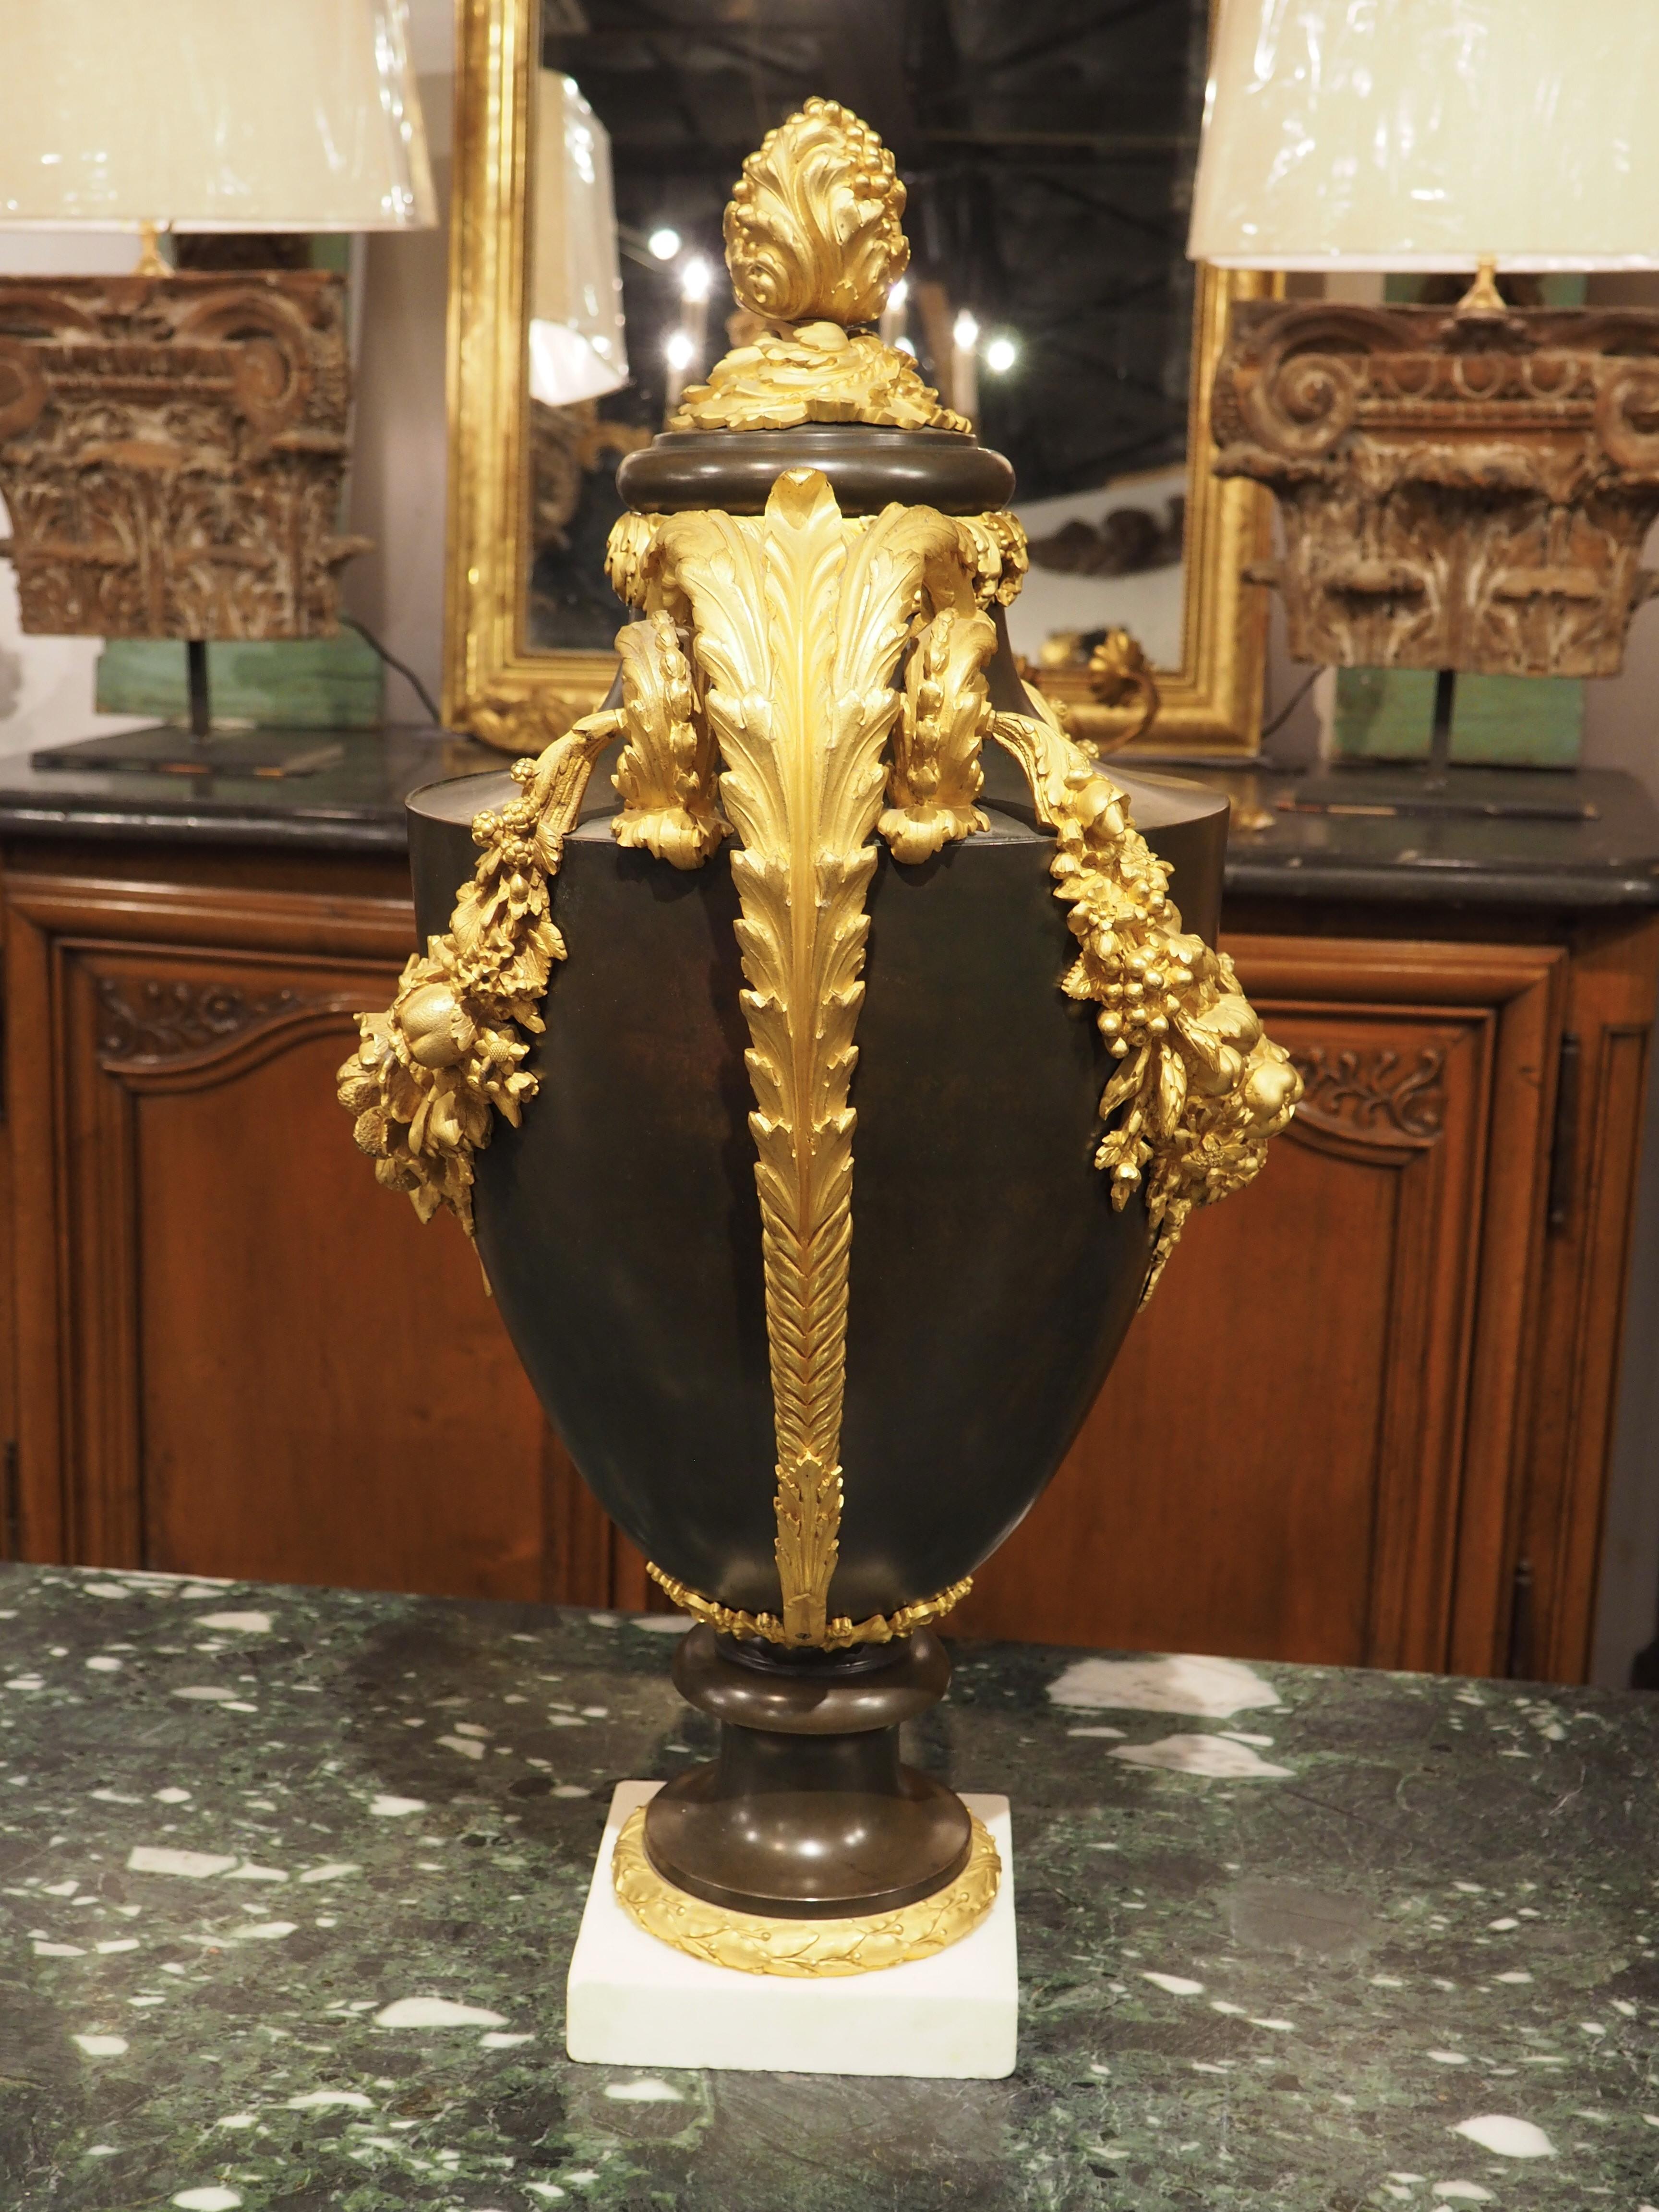 19th Century A Grand French Louis XVI Style Gilt Bronze Mounted Urn, Circa 1860 For Sale